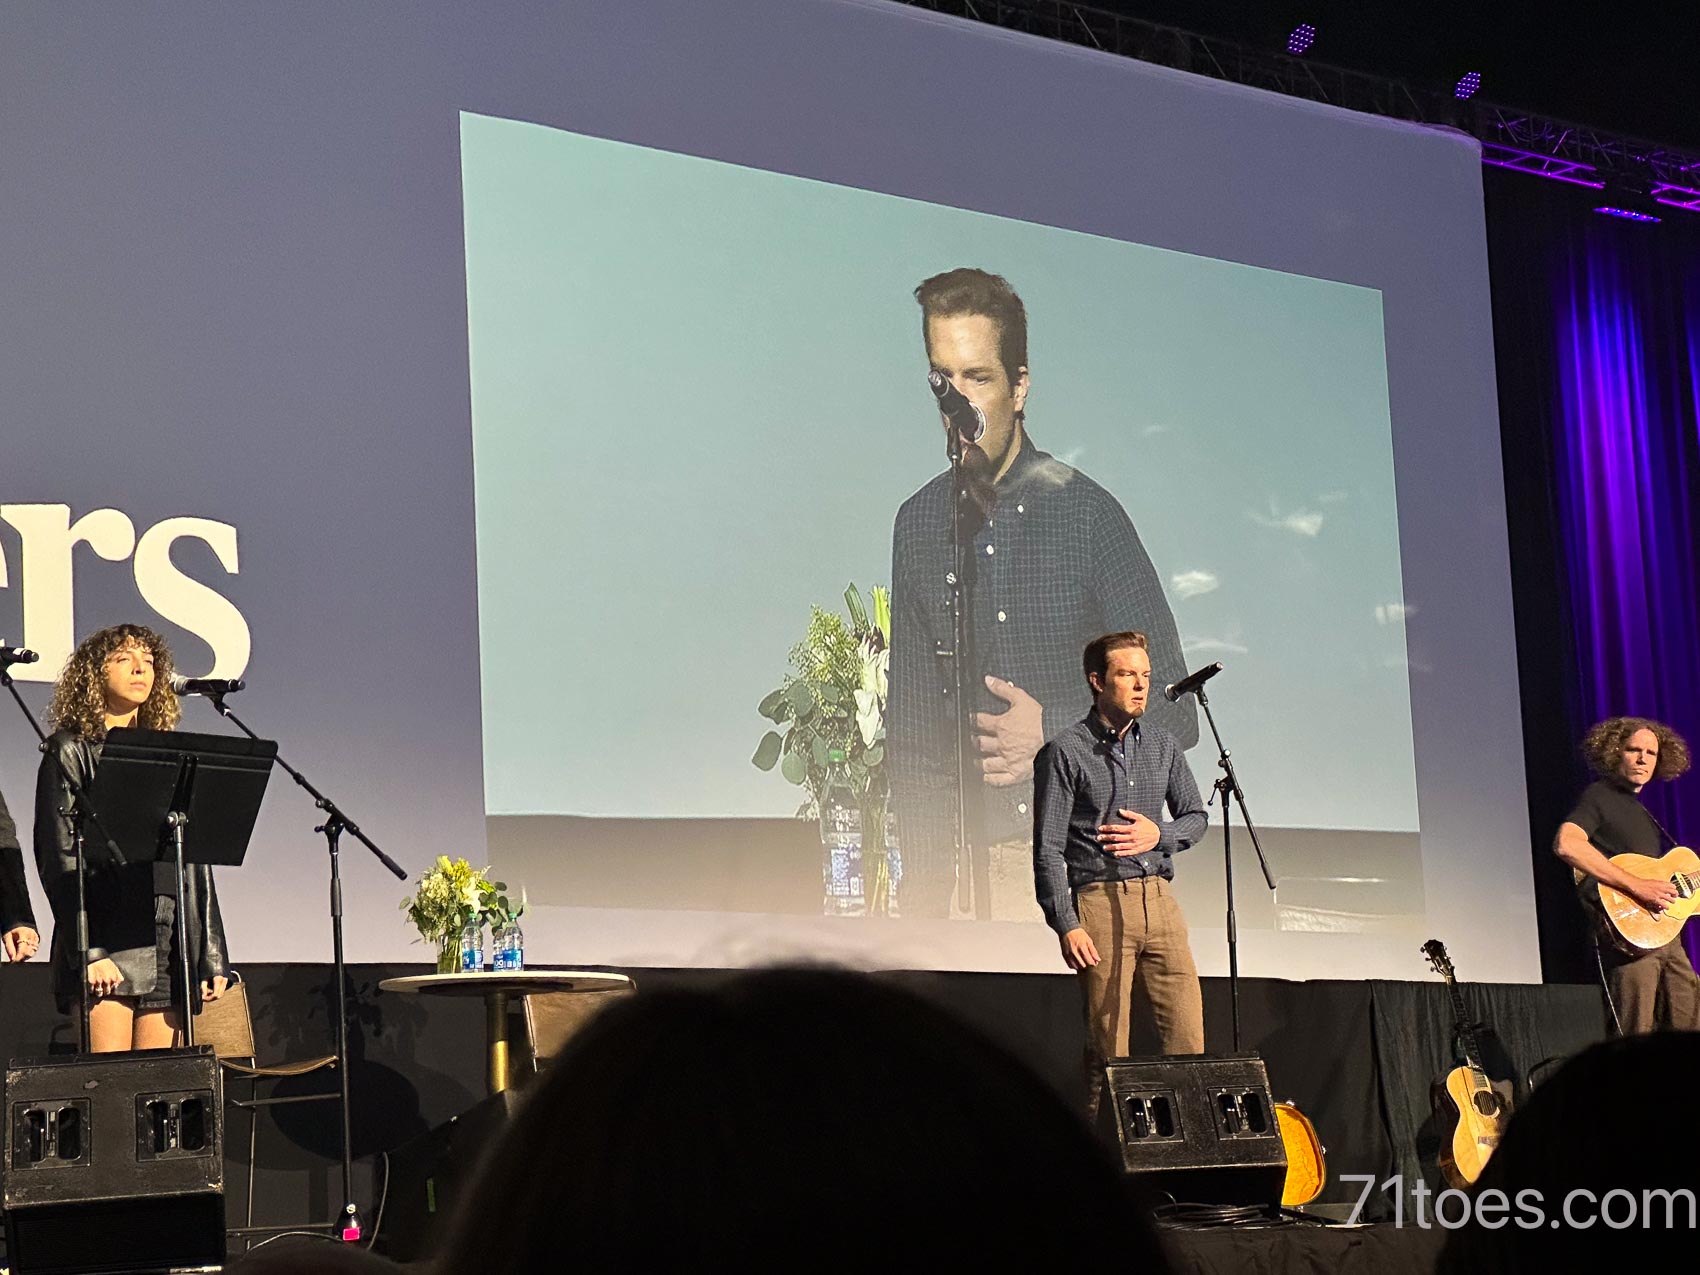 Brandon Flowers performing at a conference to create belonging